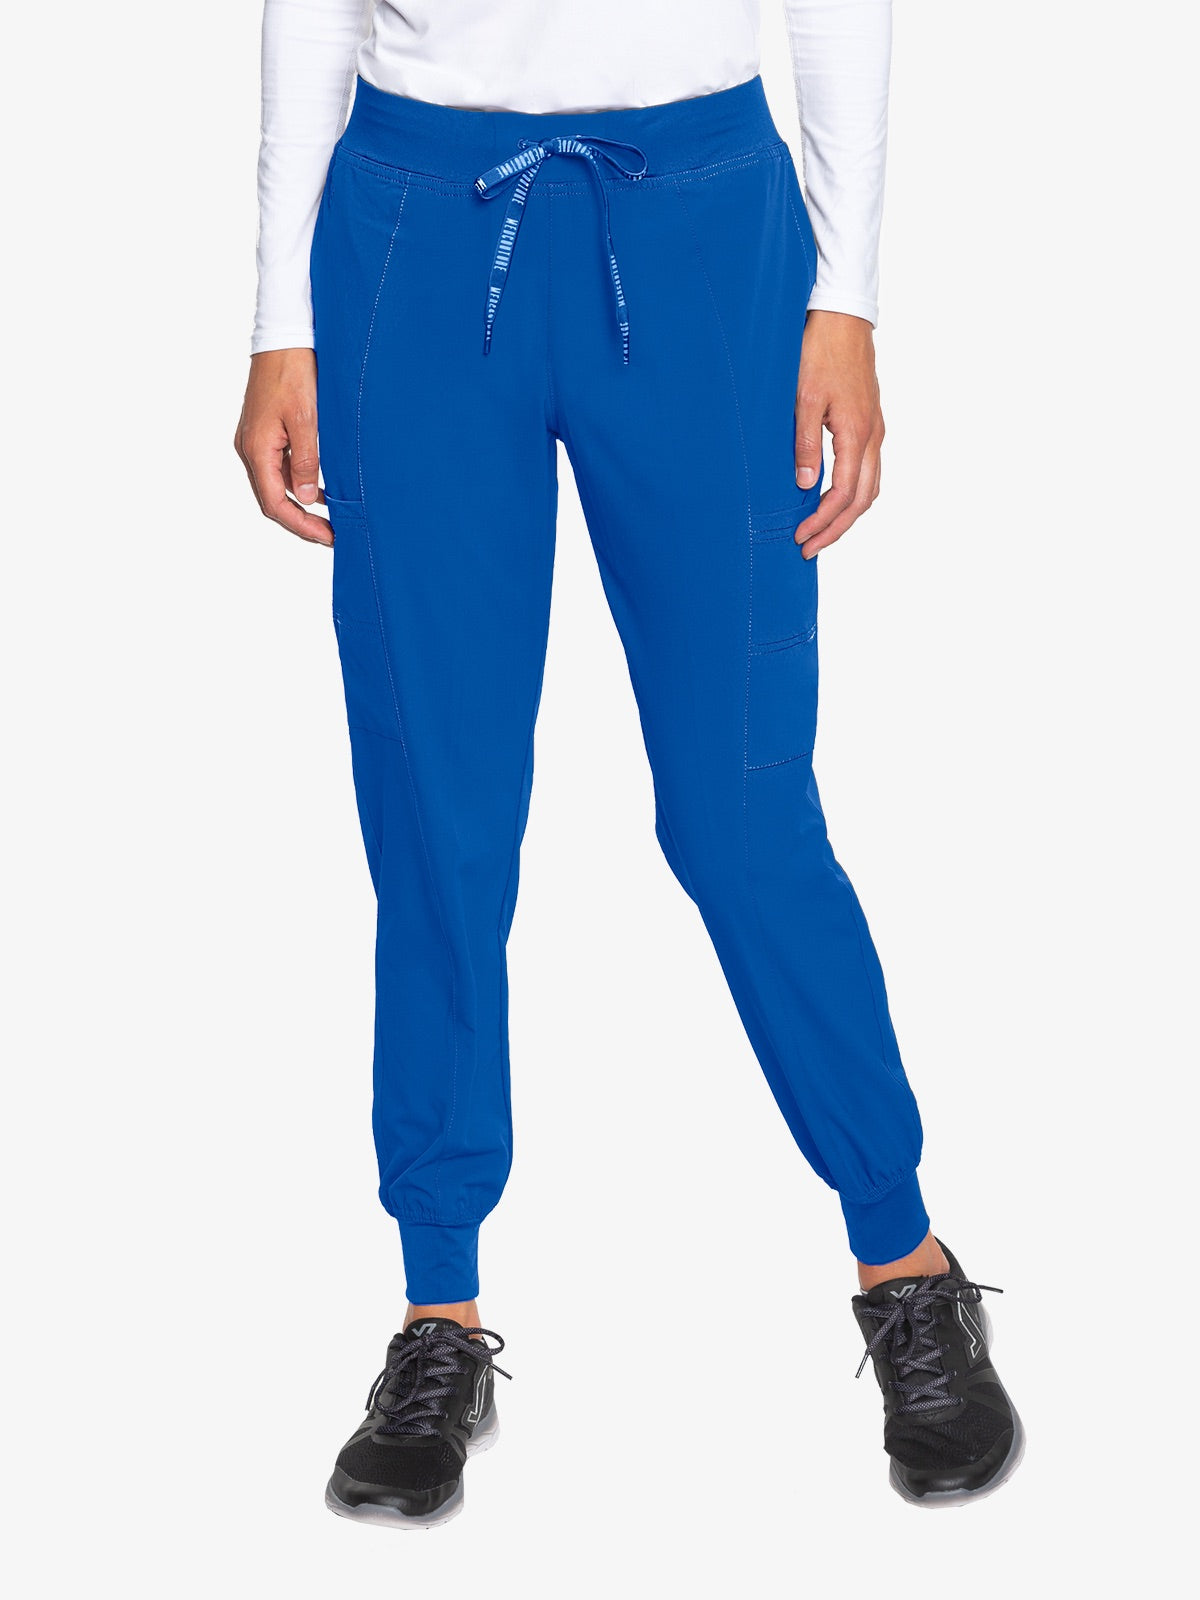 Med Couture Seamed Jogger XS-3XL Regular / Royal Blue